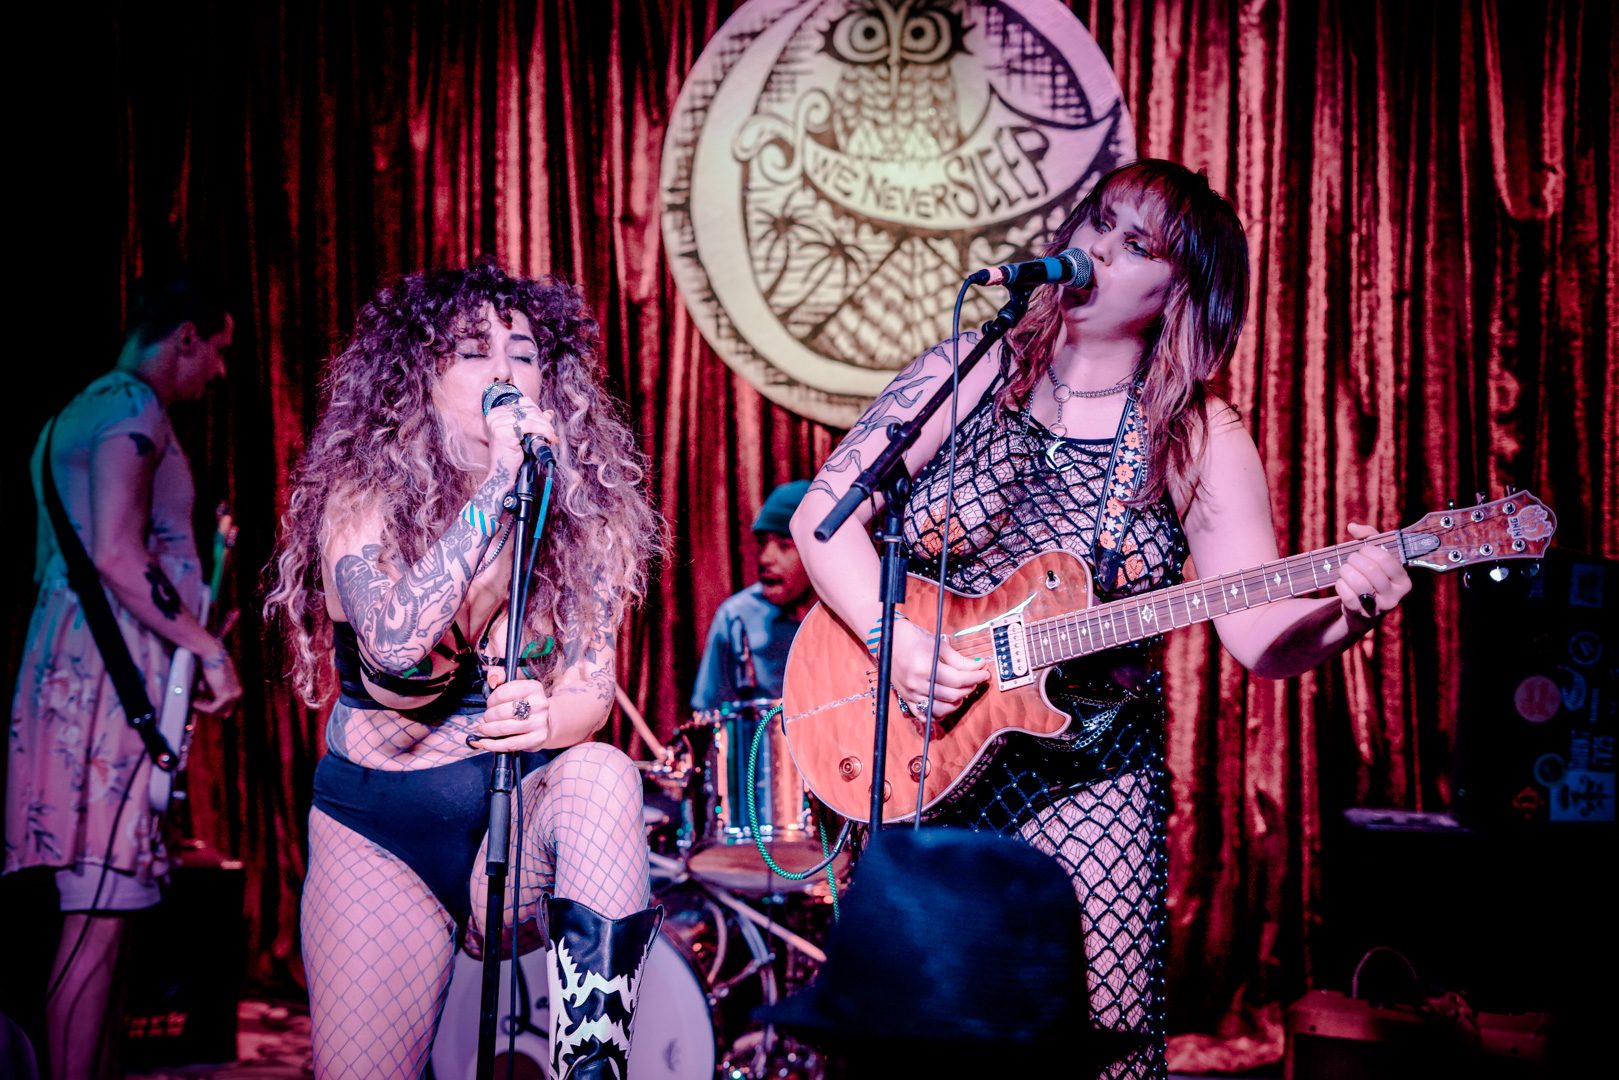 Two women sing and play guitar on stage while dressed scantily clad